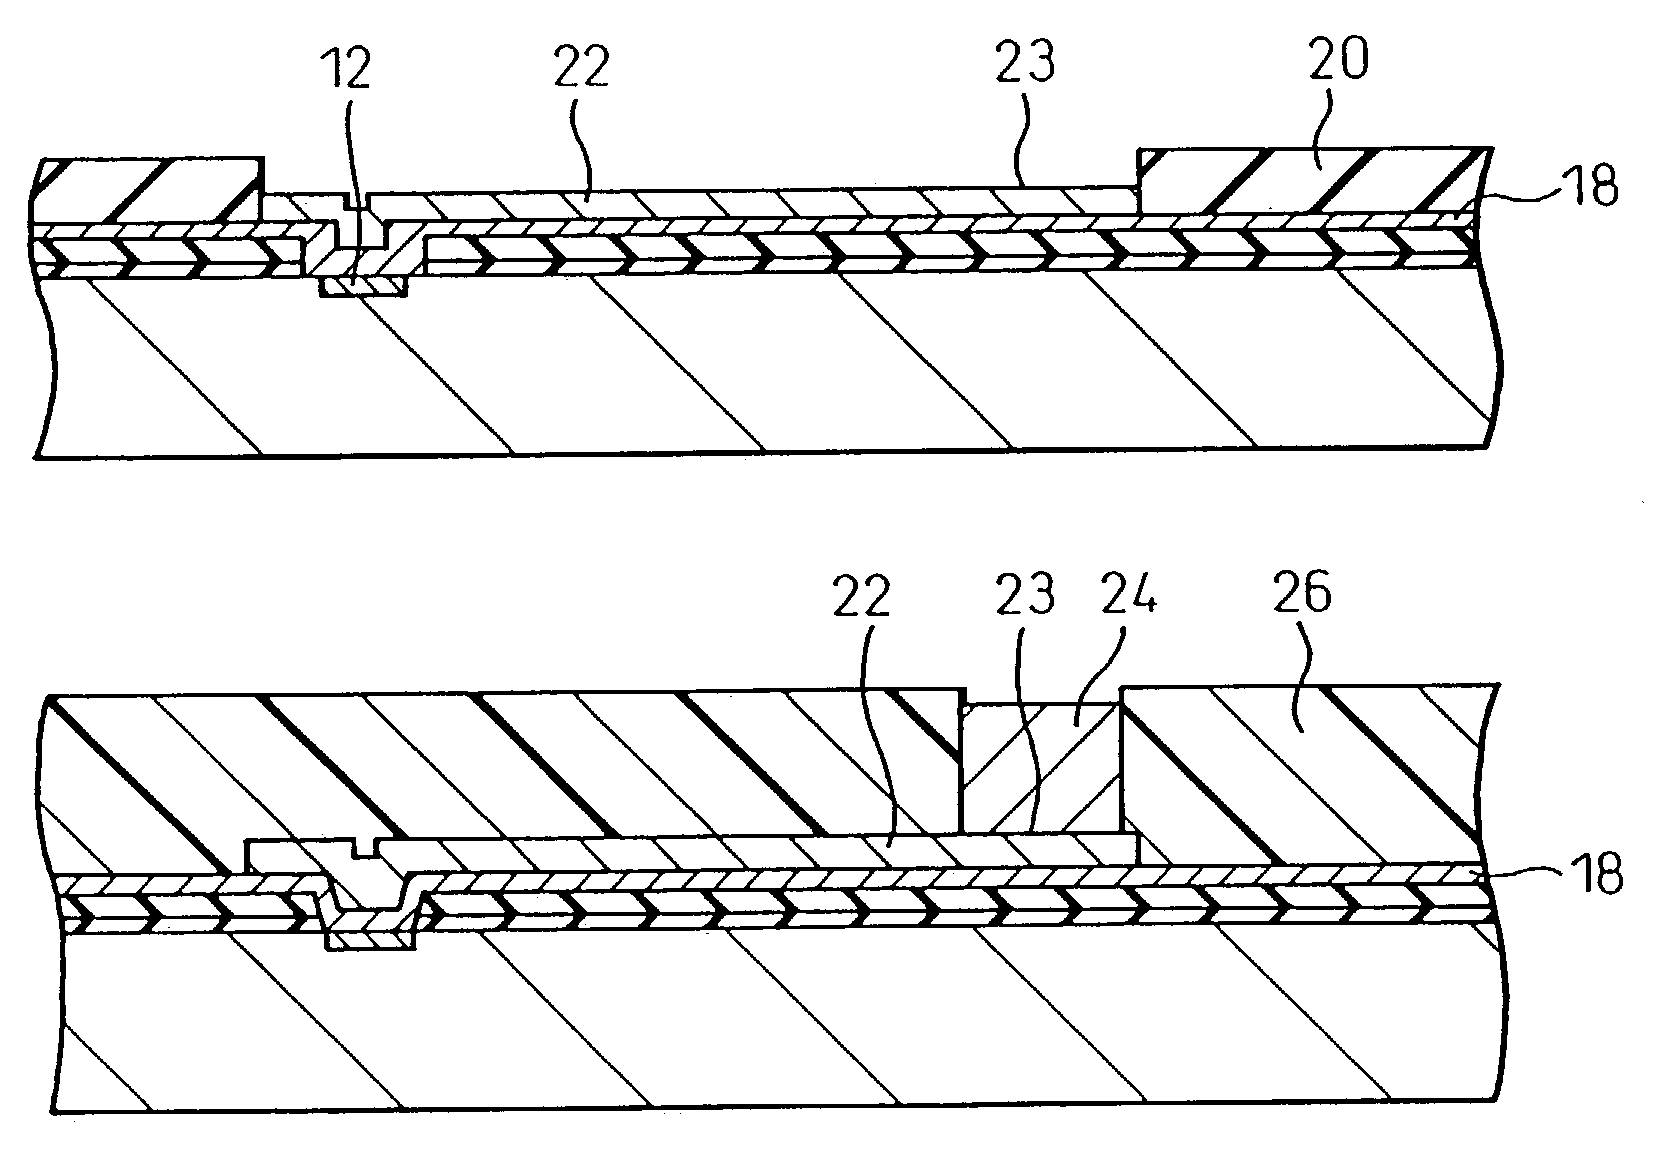 Semiconductor wafer and semiconductor device provided with columnar electrodes and methods of producing the wafer and device